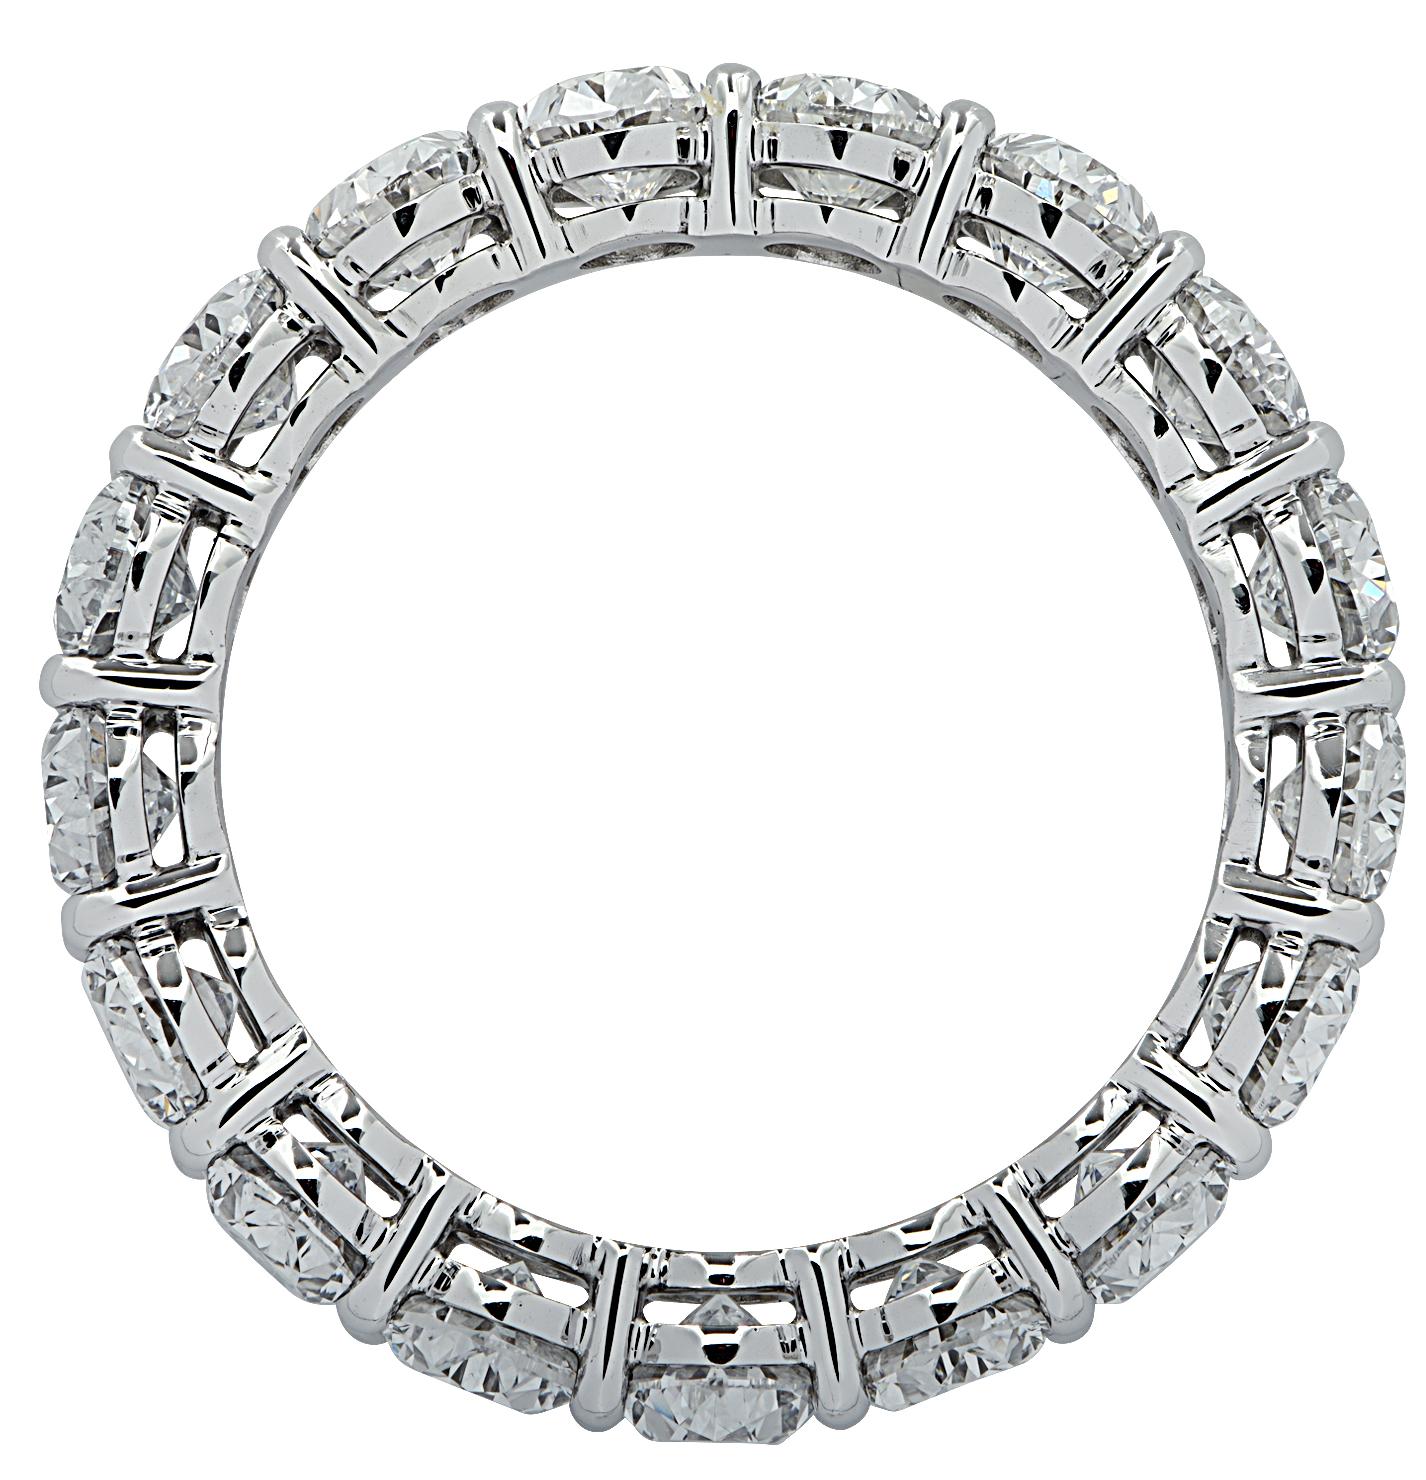 Exquisite Vivid Diamonds eternity band crafted in Platinum, showcasing 17 stunning oval cut diamonds weighing 5.37 carats total, E-F color, VS clarity. Each diamond was carefully selected, perfectly matched and set in a seamless sea of eternity,